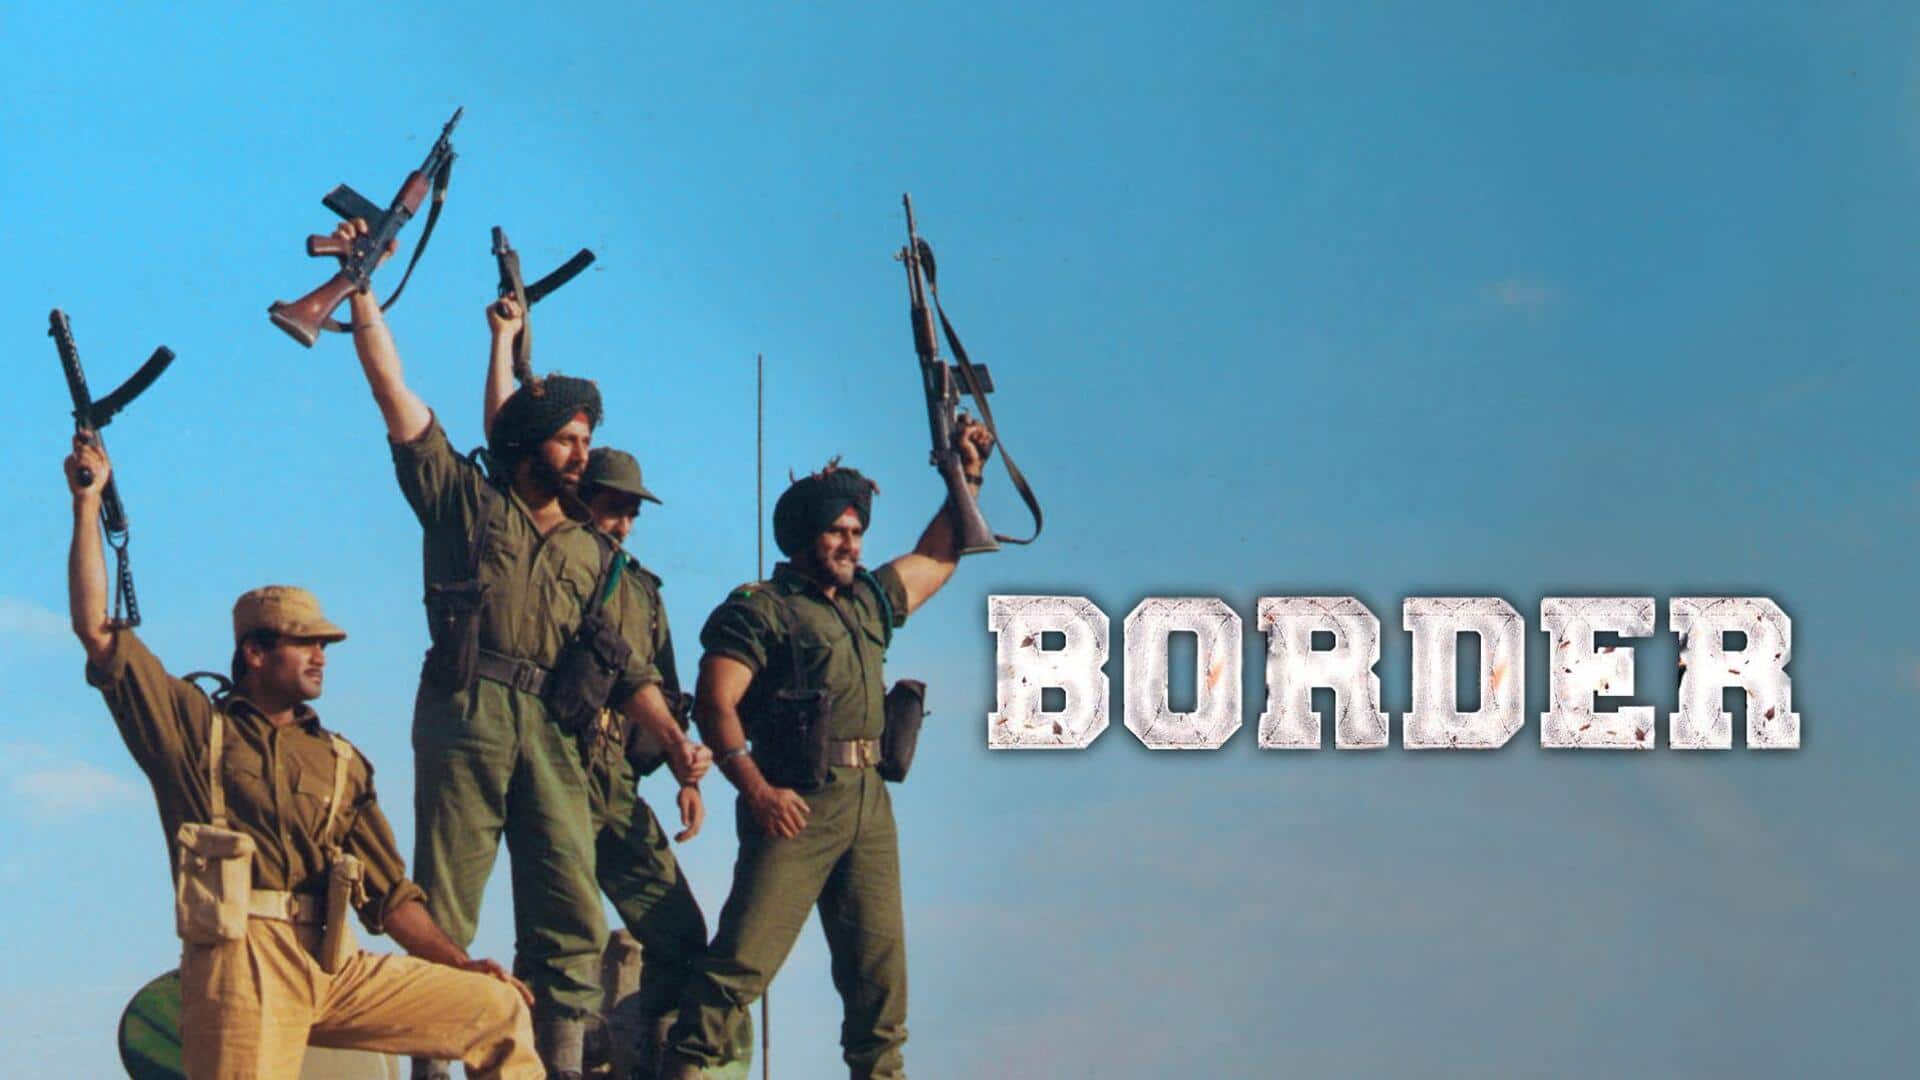 'Border 2' starring Sunny Deol reportedly in works